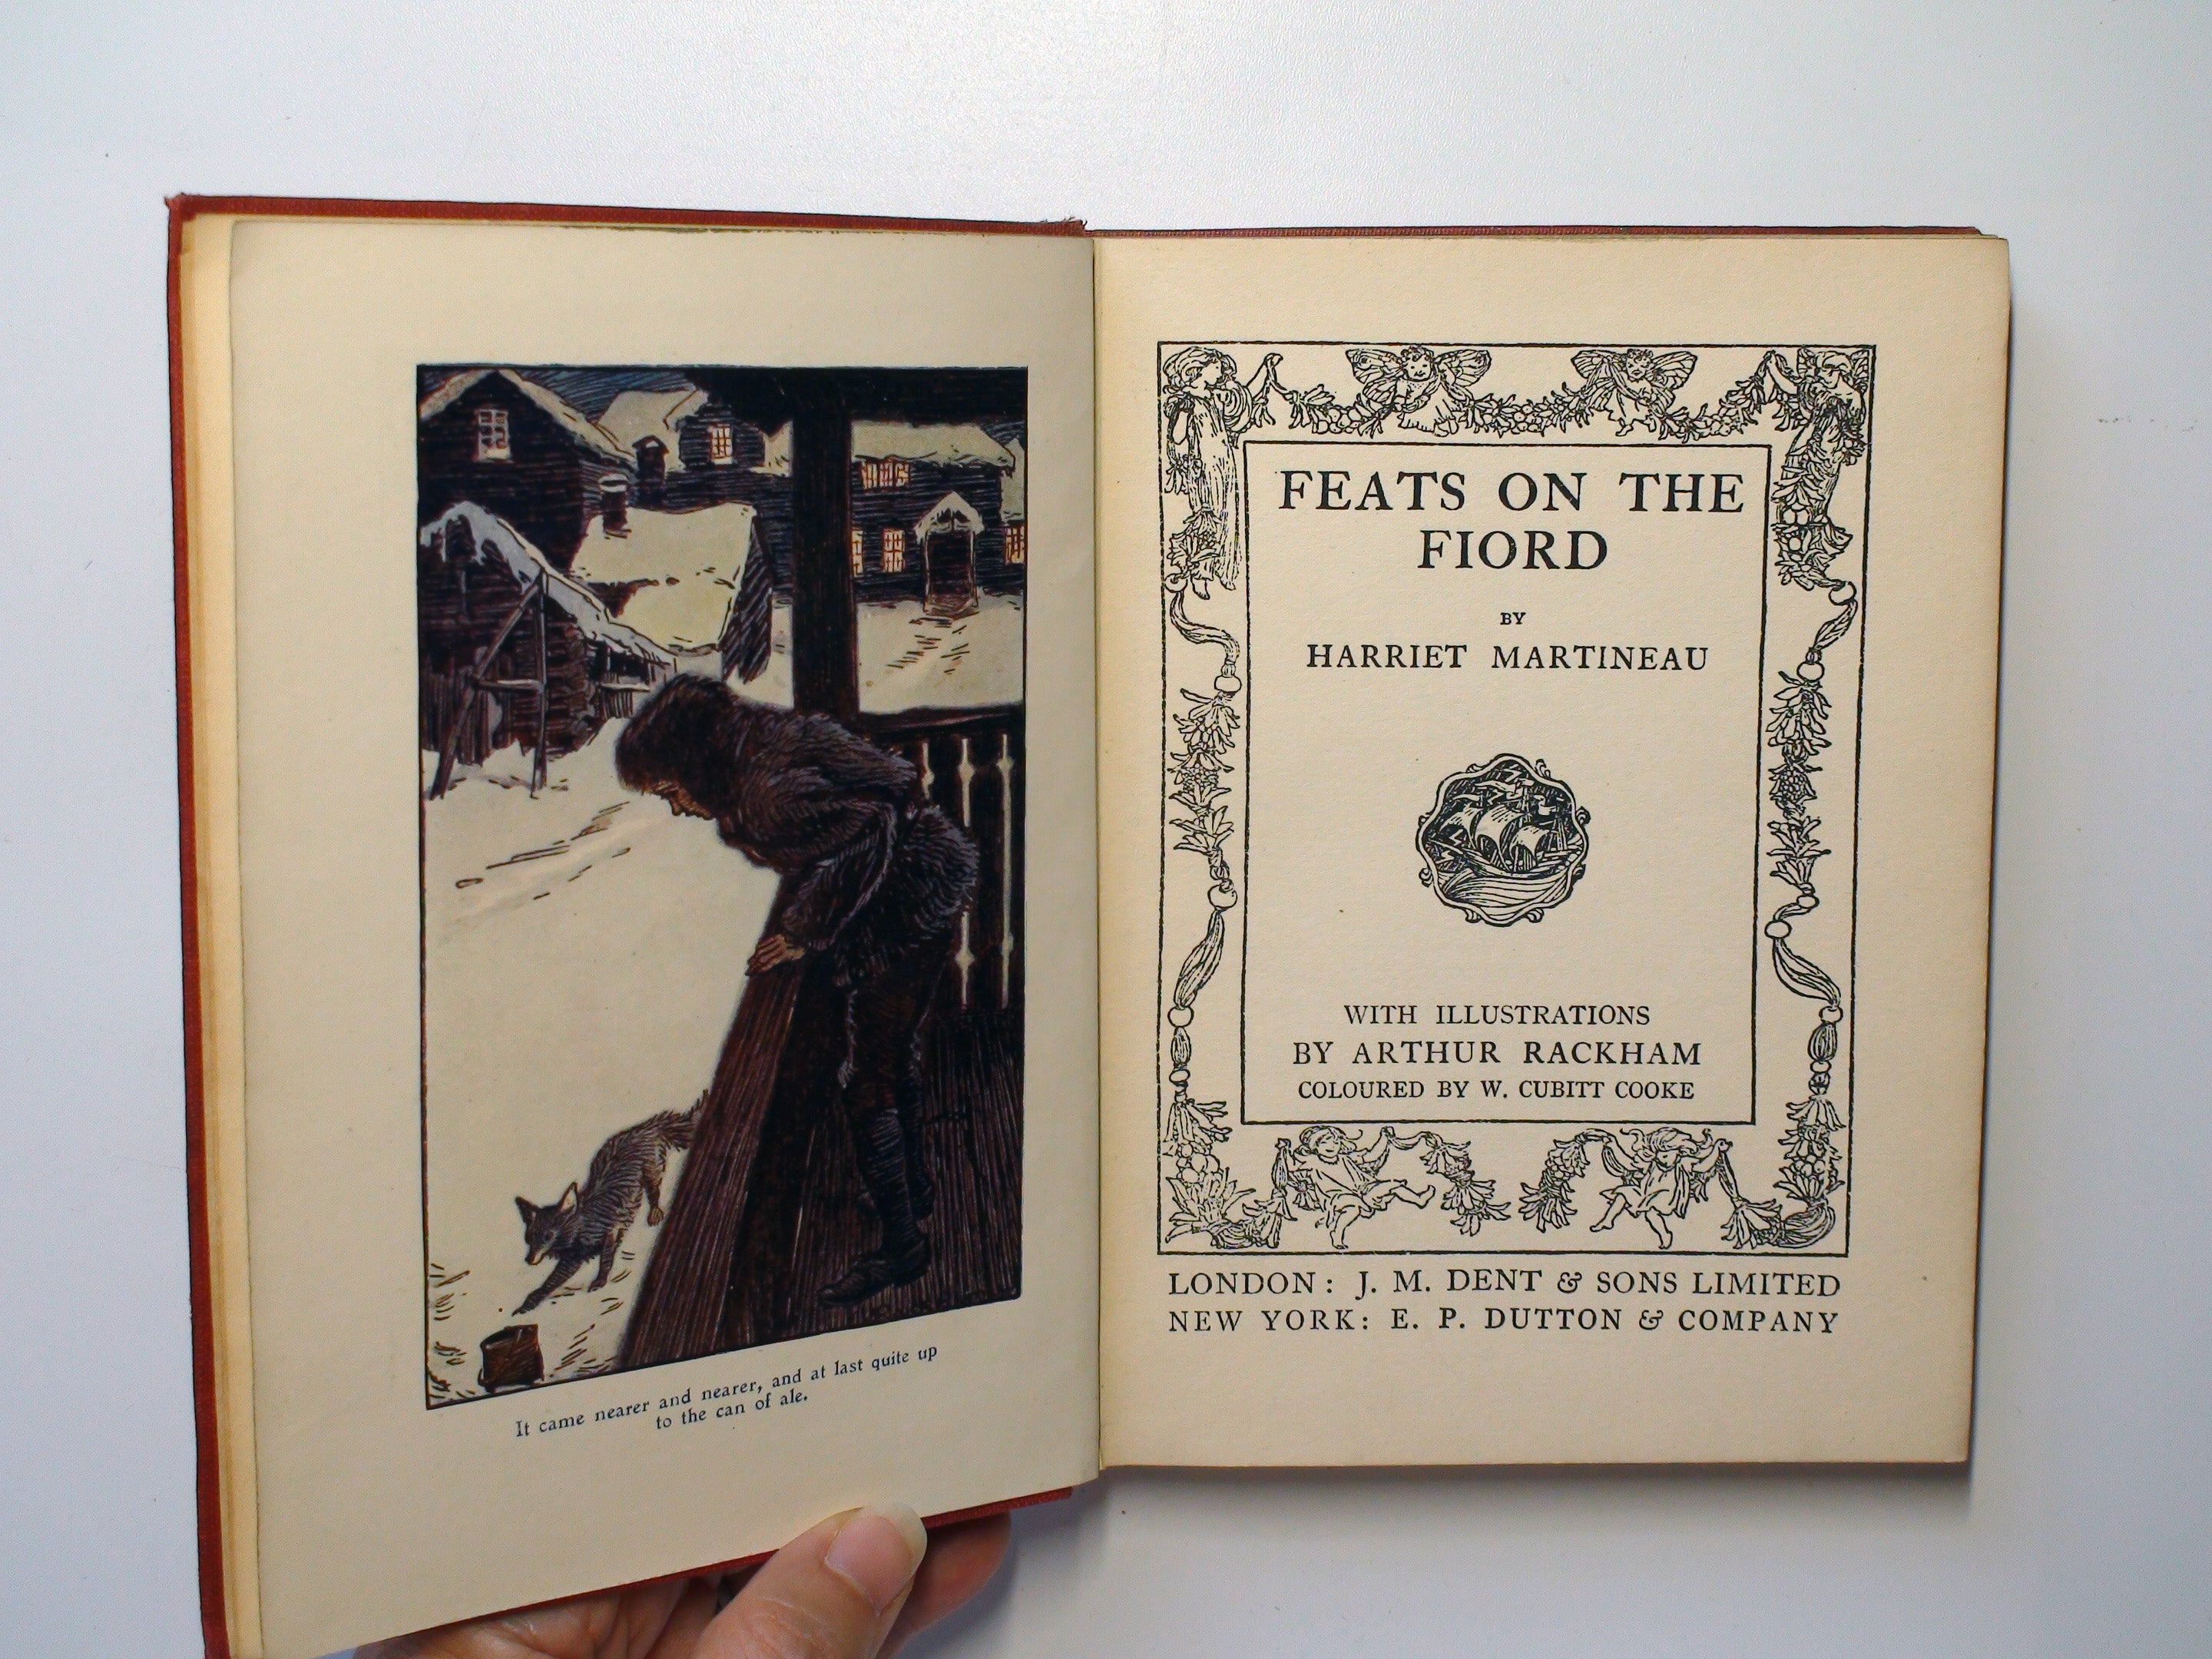 Feats On The Fjords by Harriet Martineau, Illustrated by Arthur Rackham, 1914